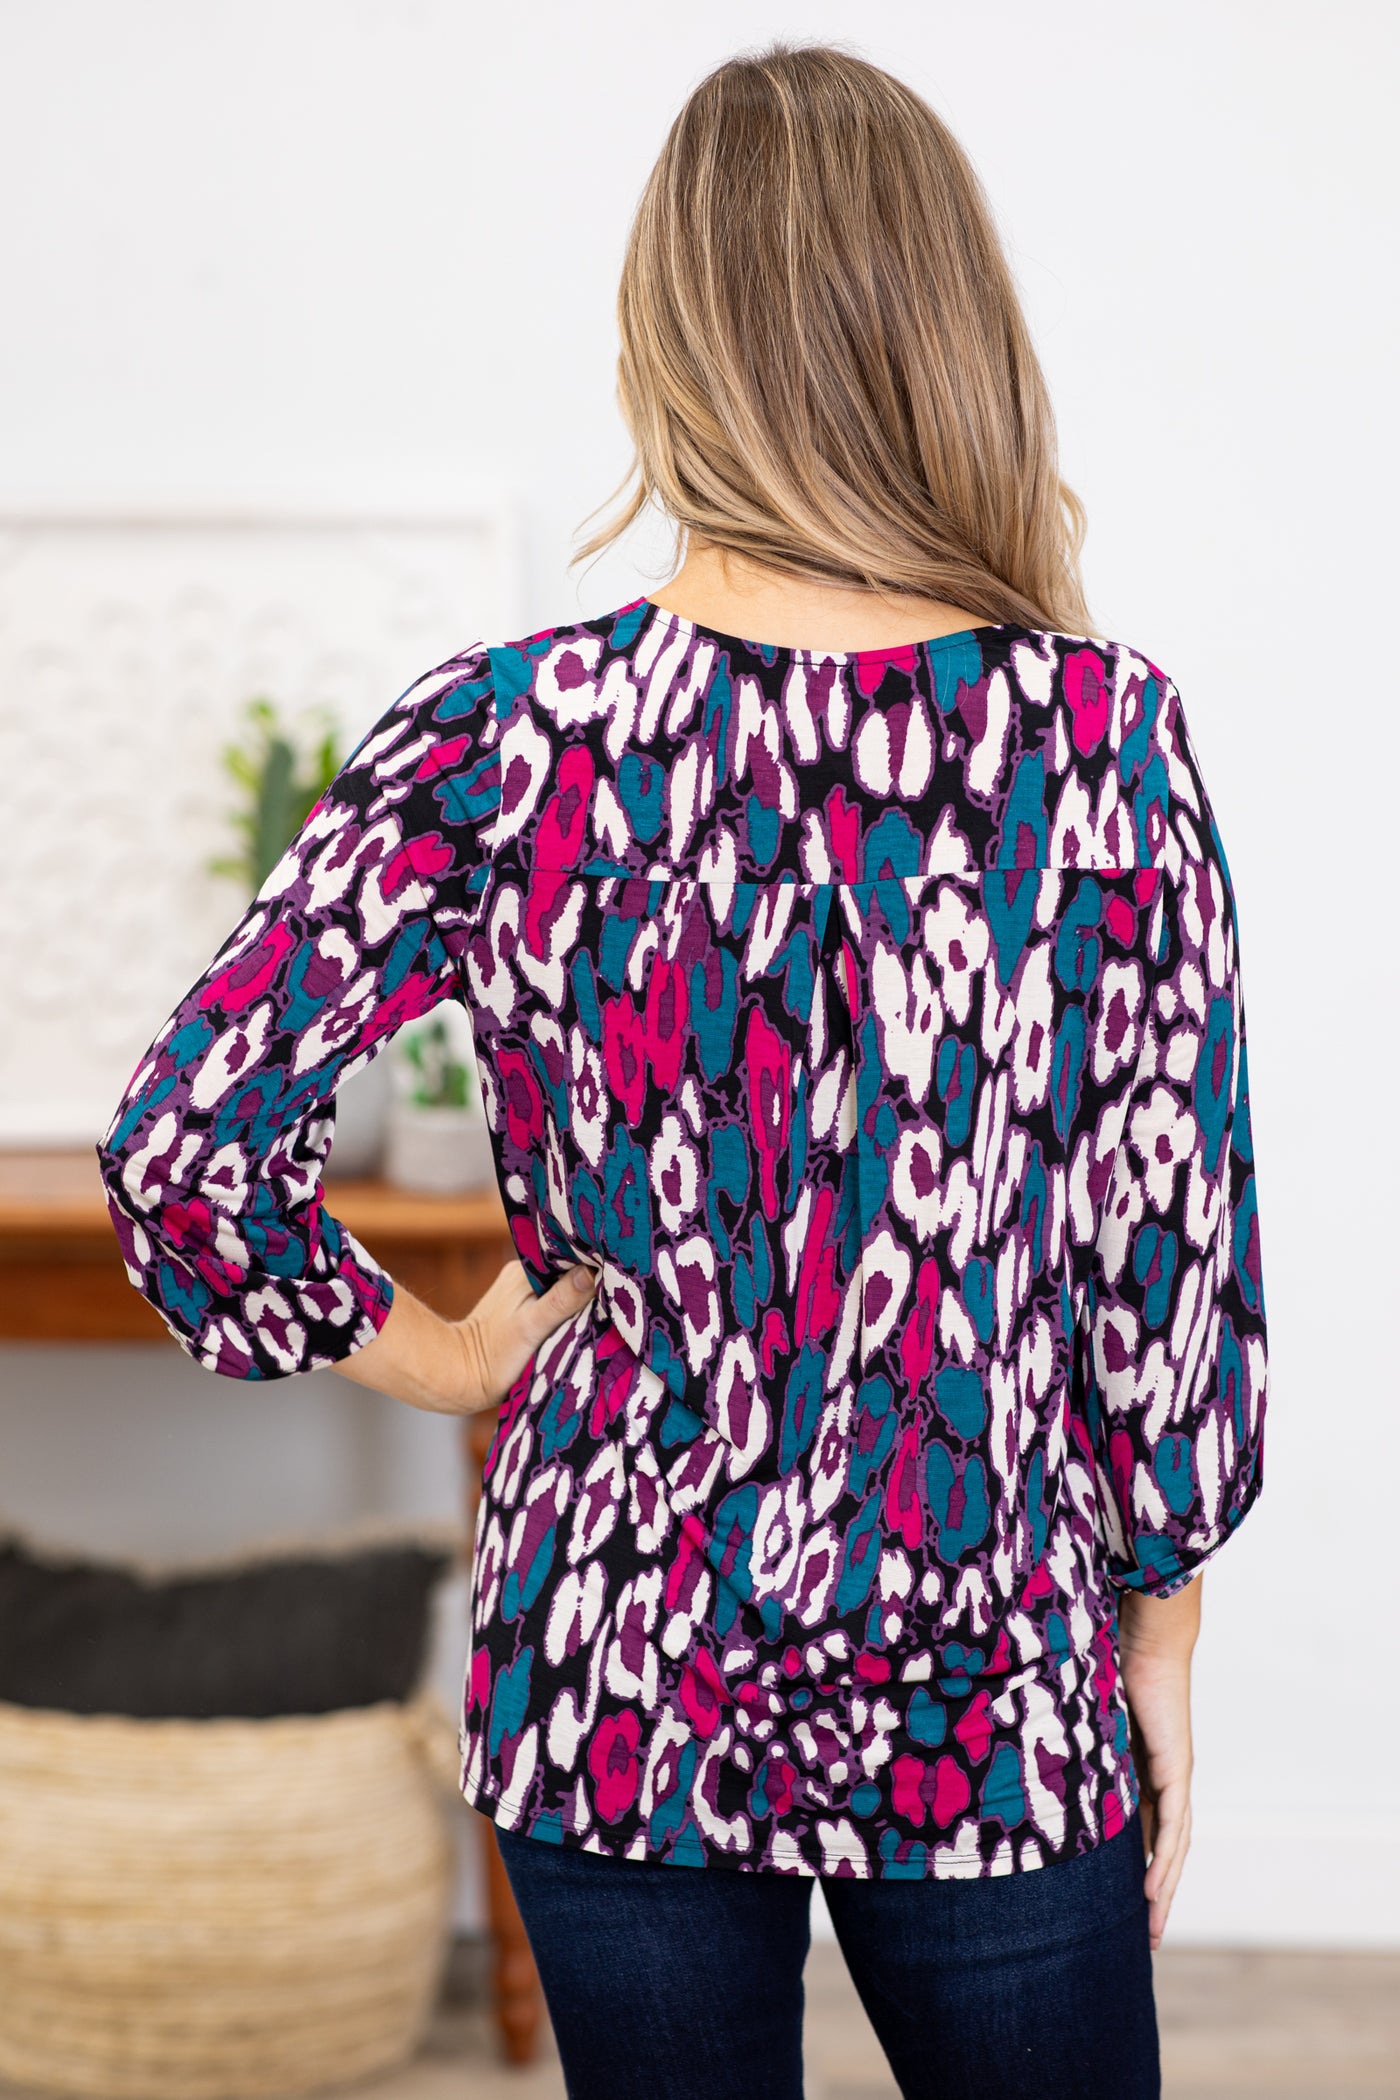 Hot Pink and Teal Abstract Animal Print Top